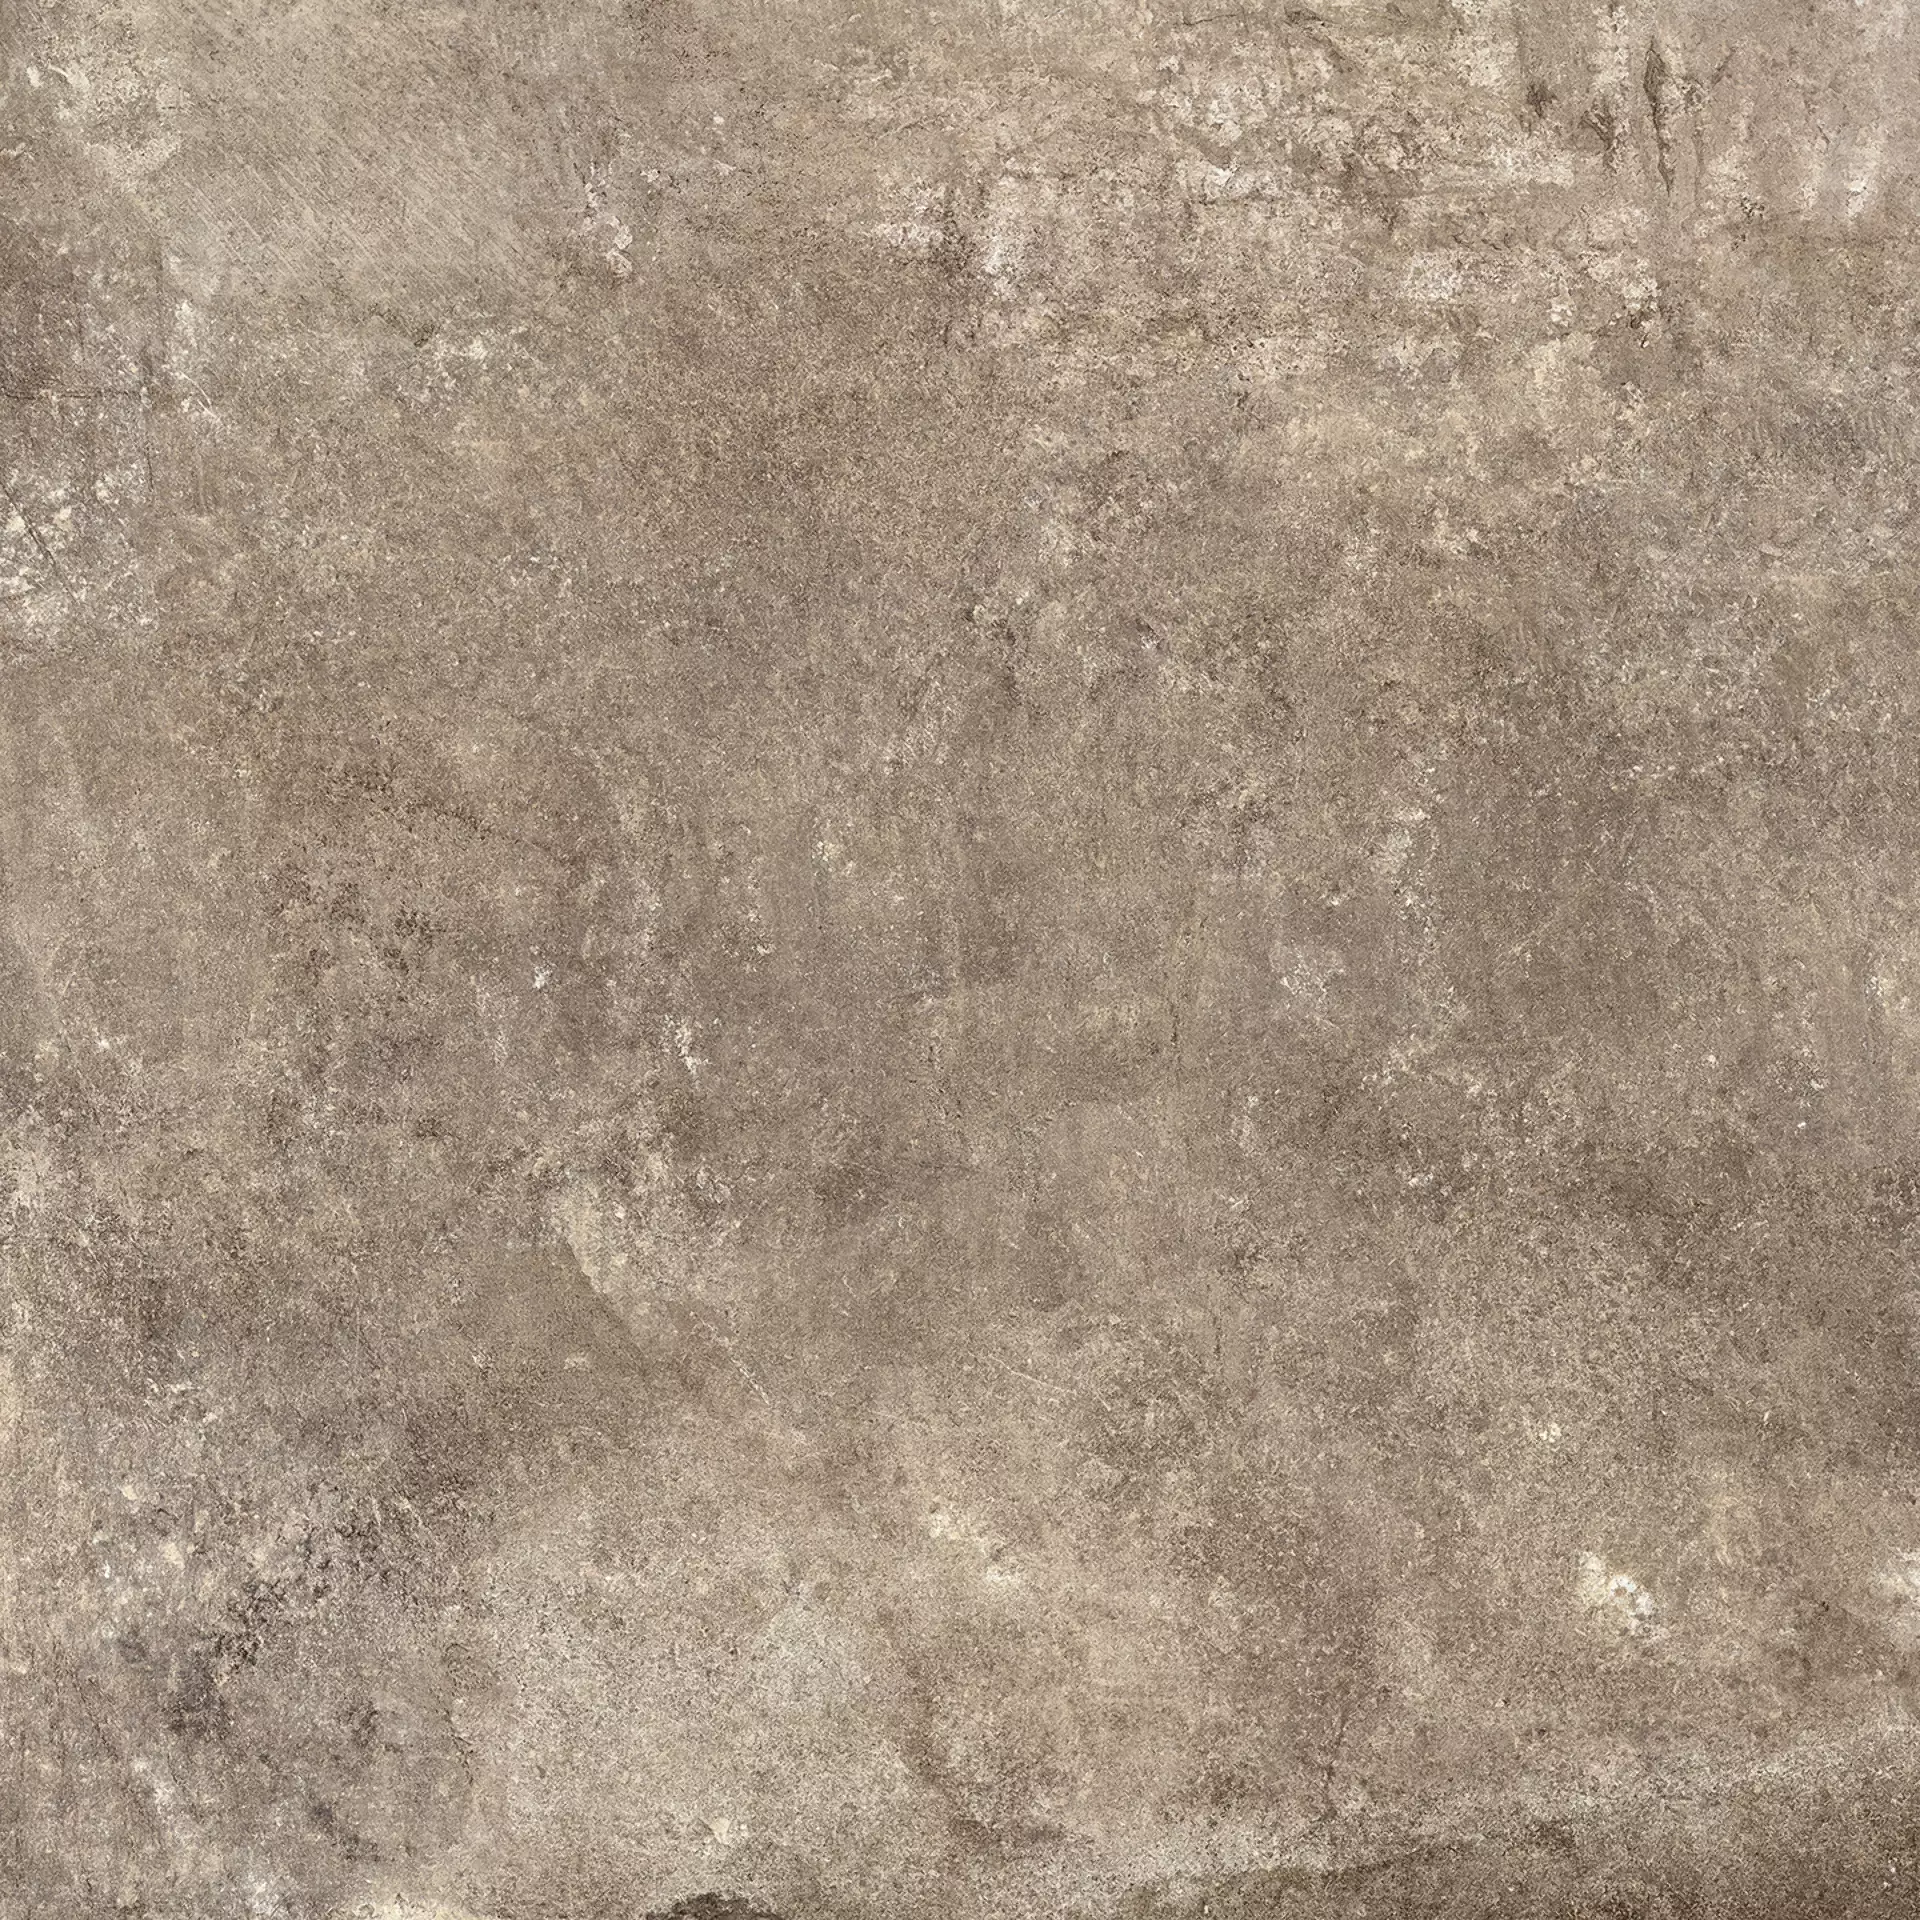 Fondovalle Reframe Taupe Natural REF093 80x80cm rectified 8,5mm